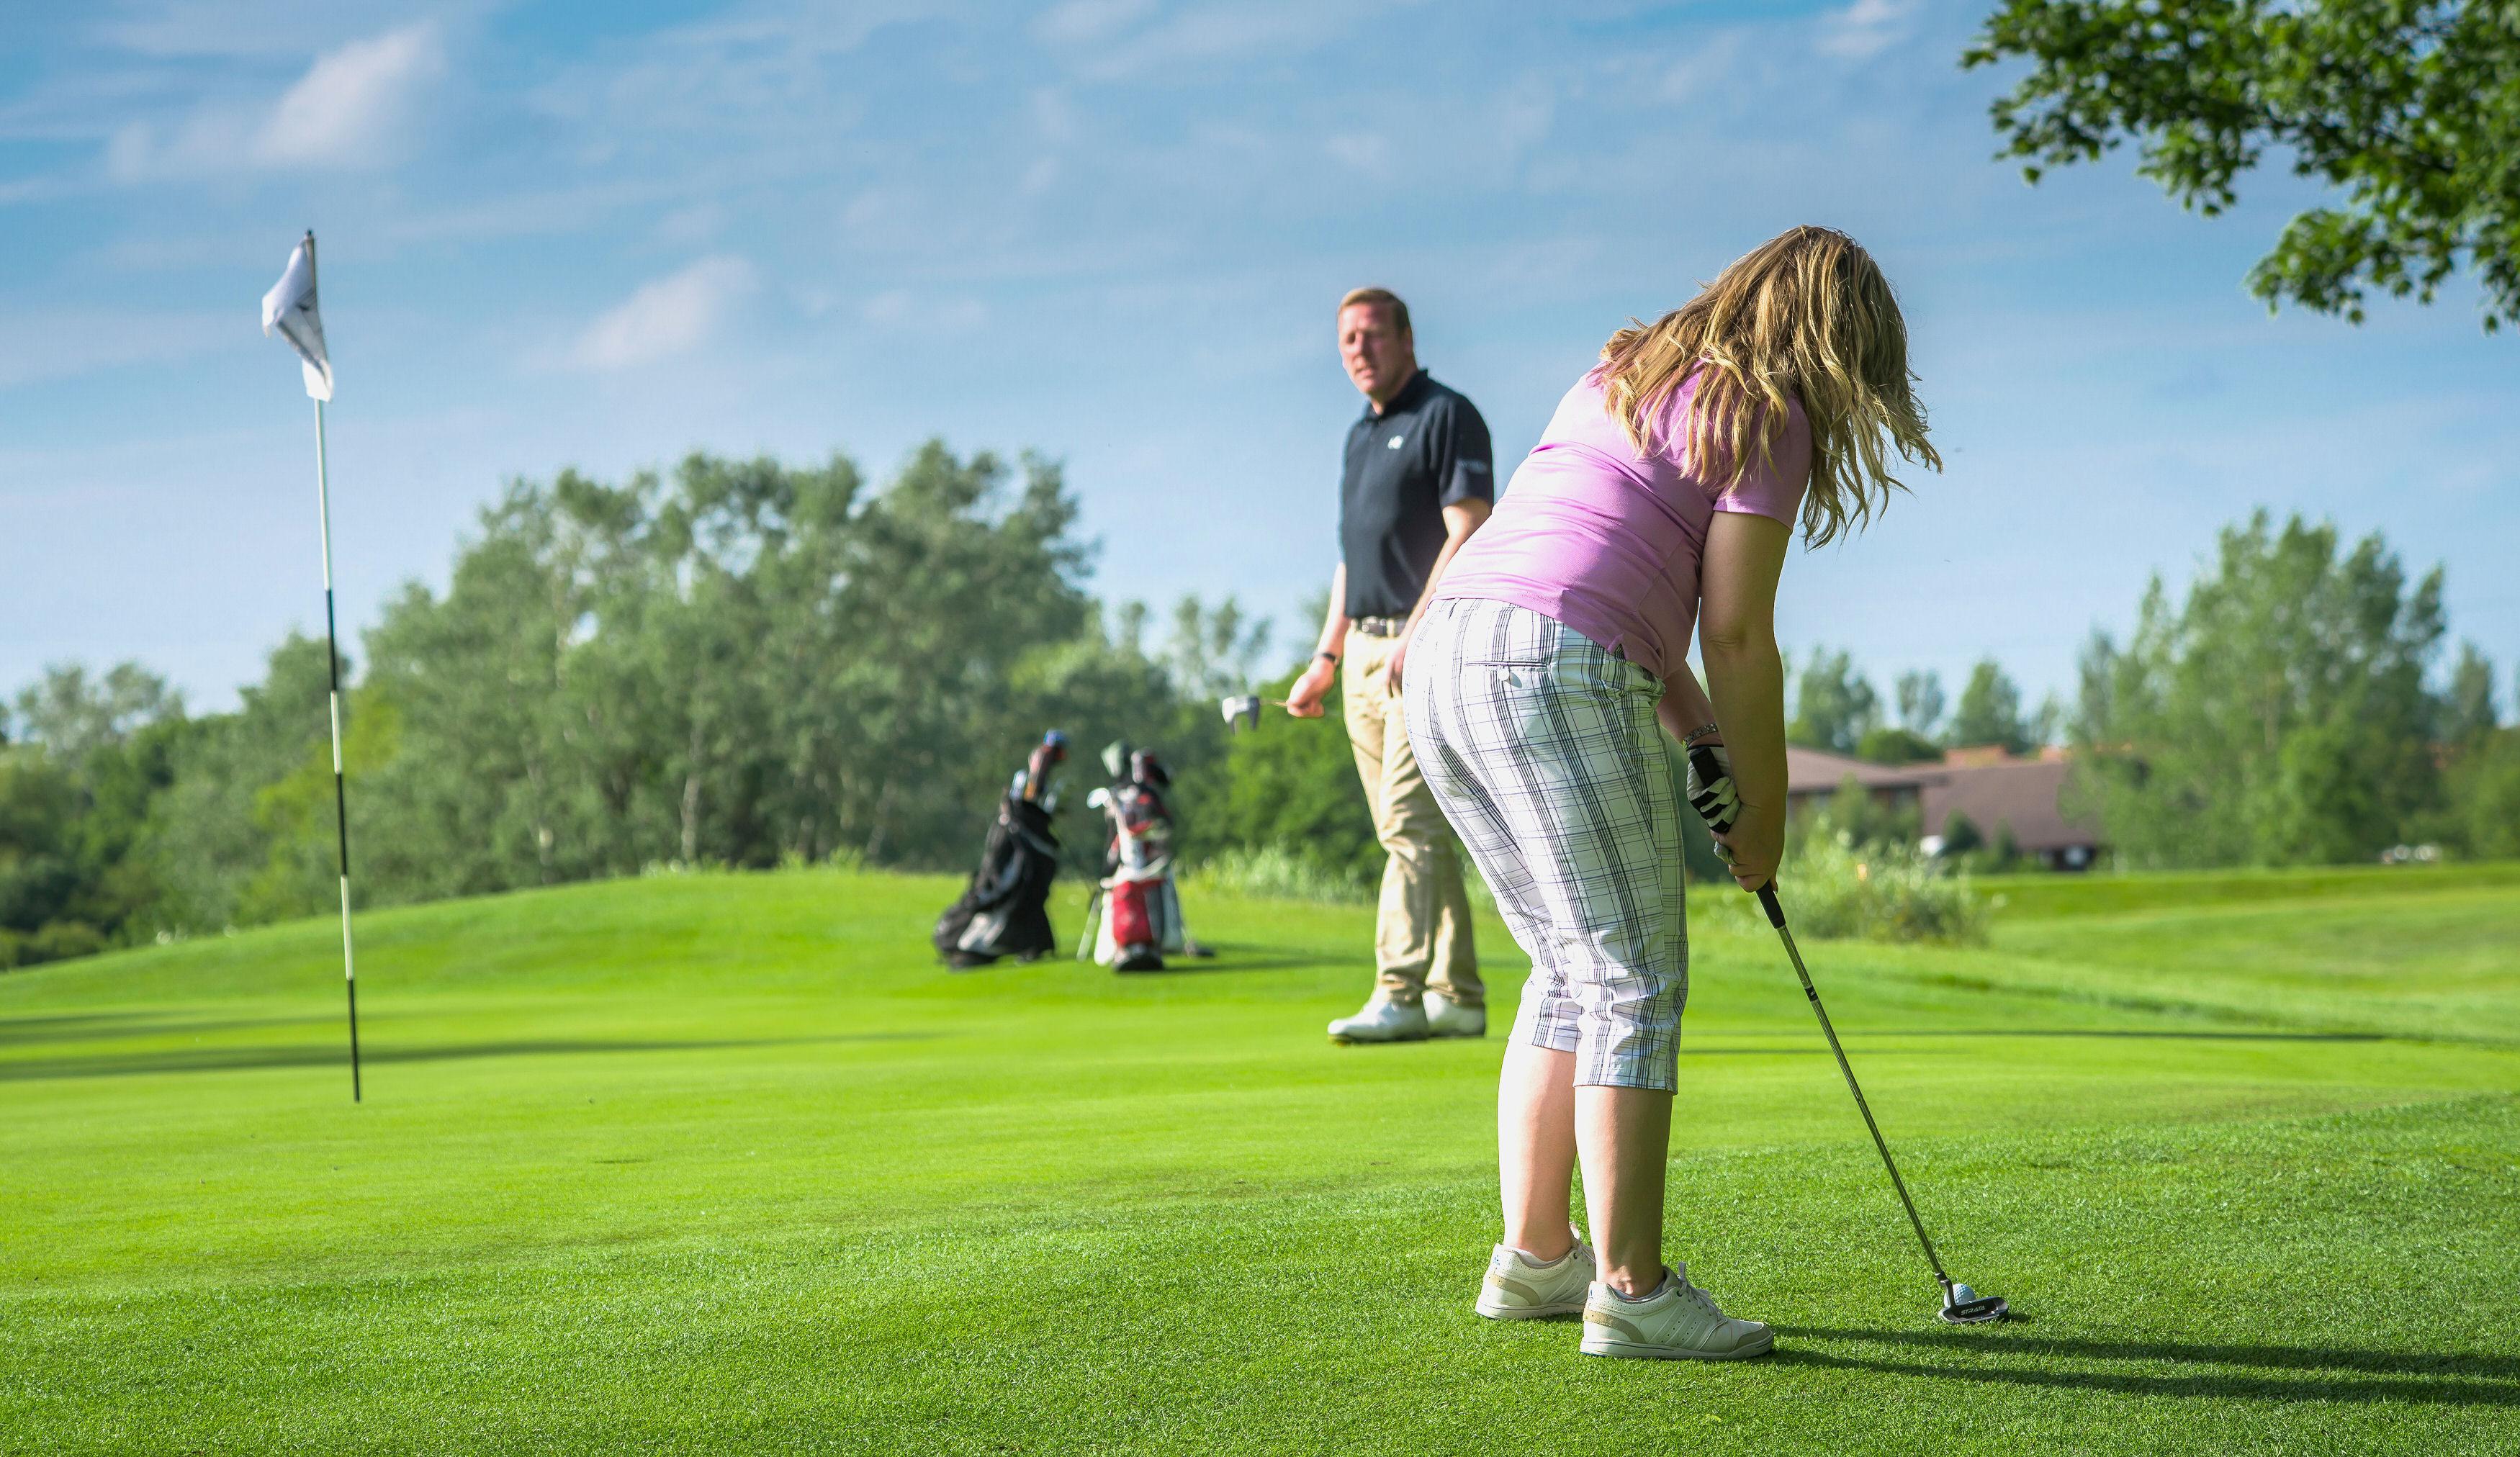 New online membership to help golfers and clubs after lockdown